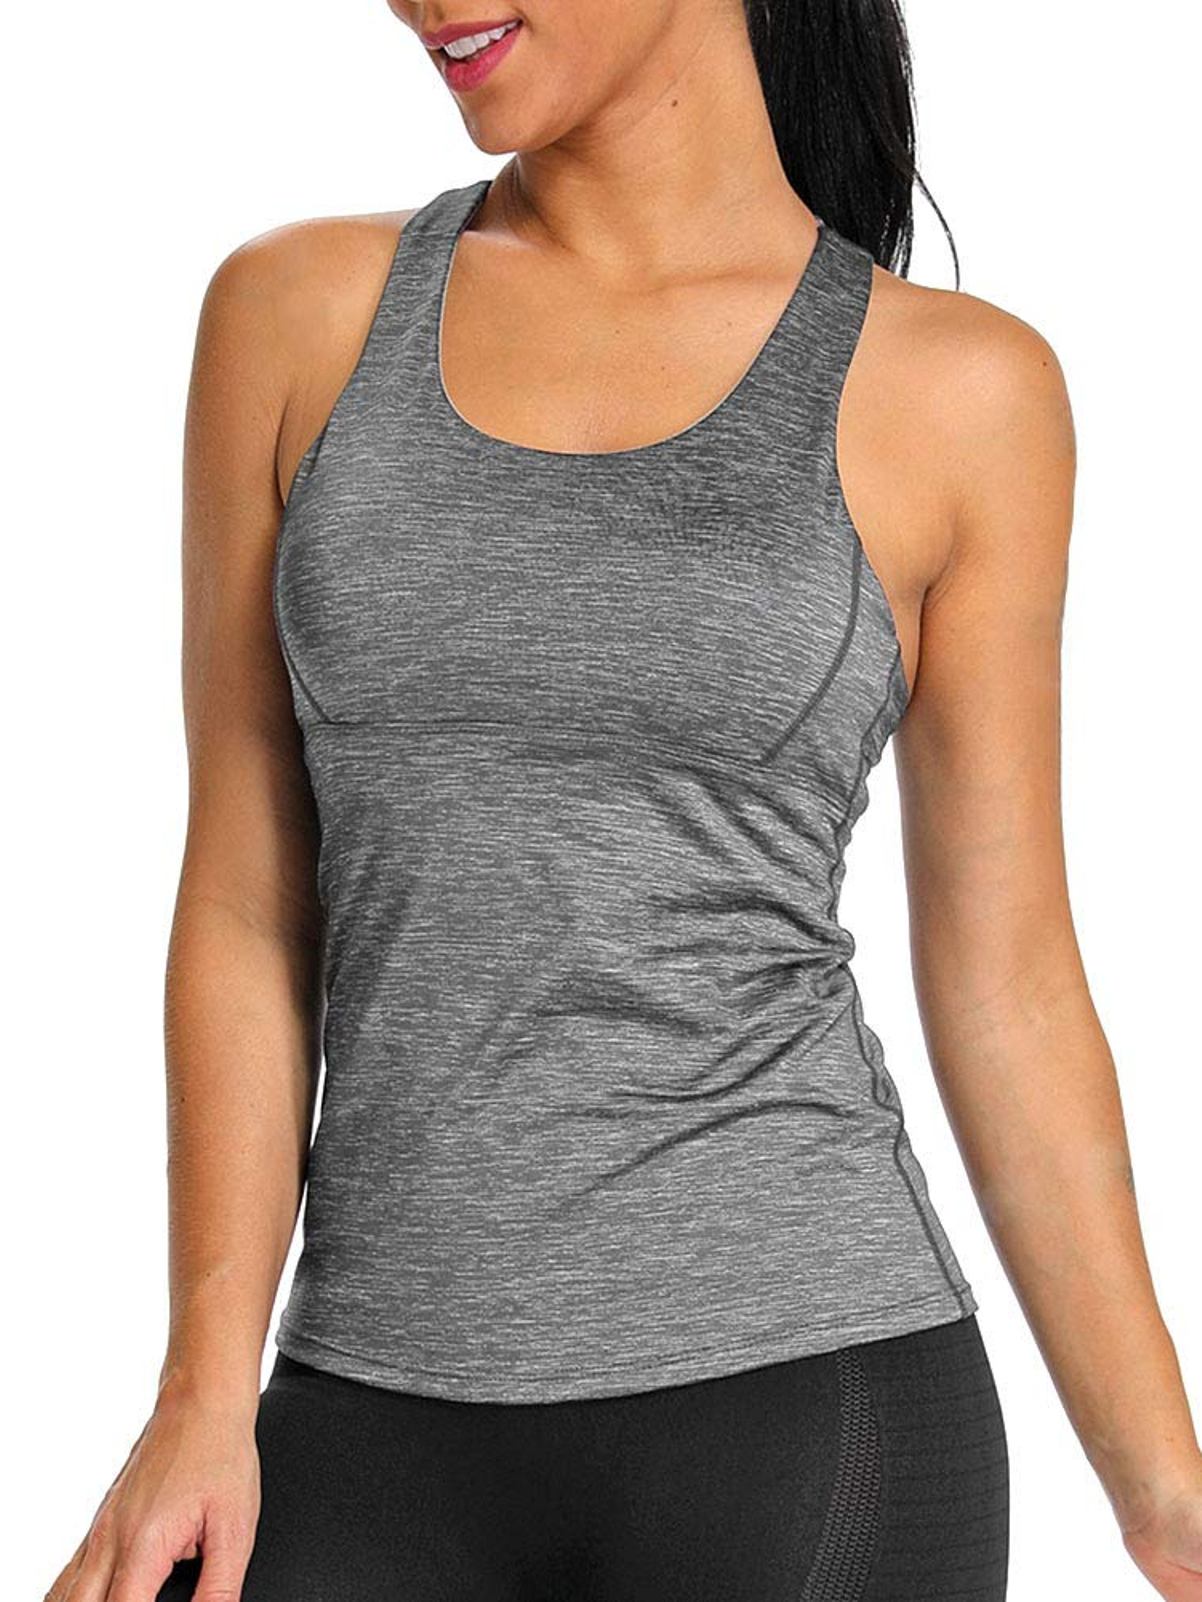 yoga tops with built in bra